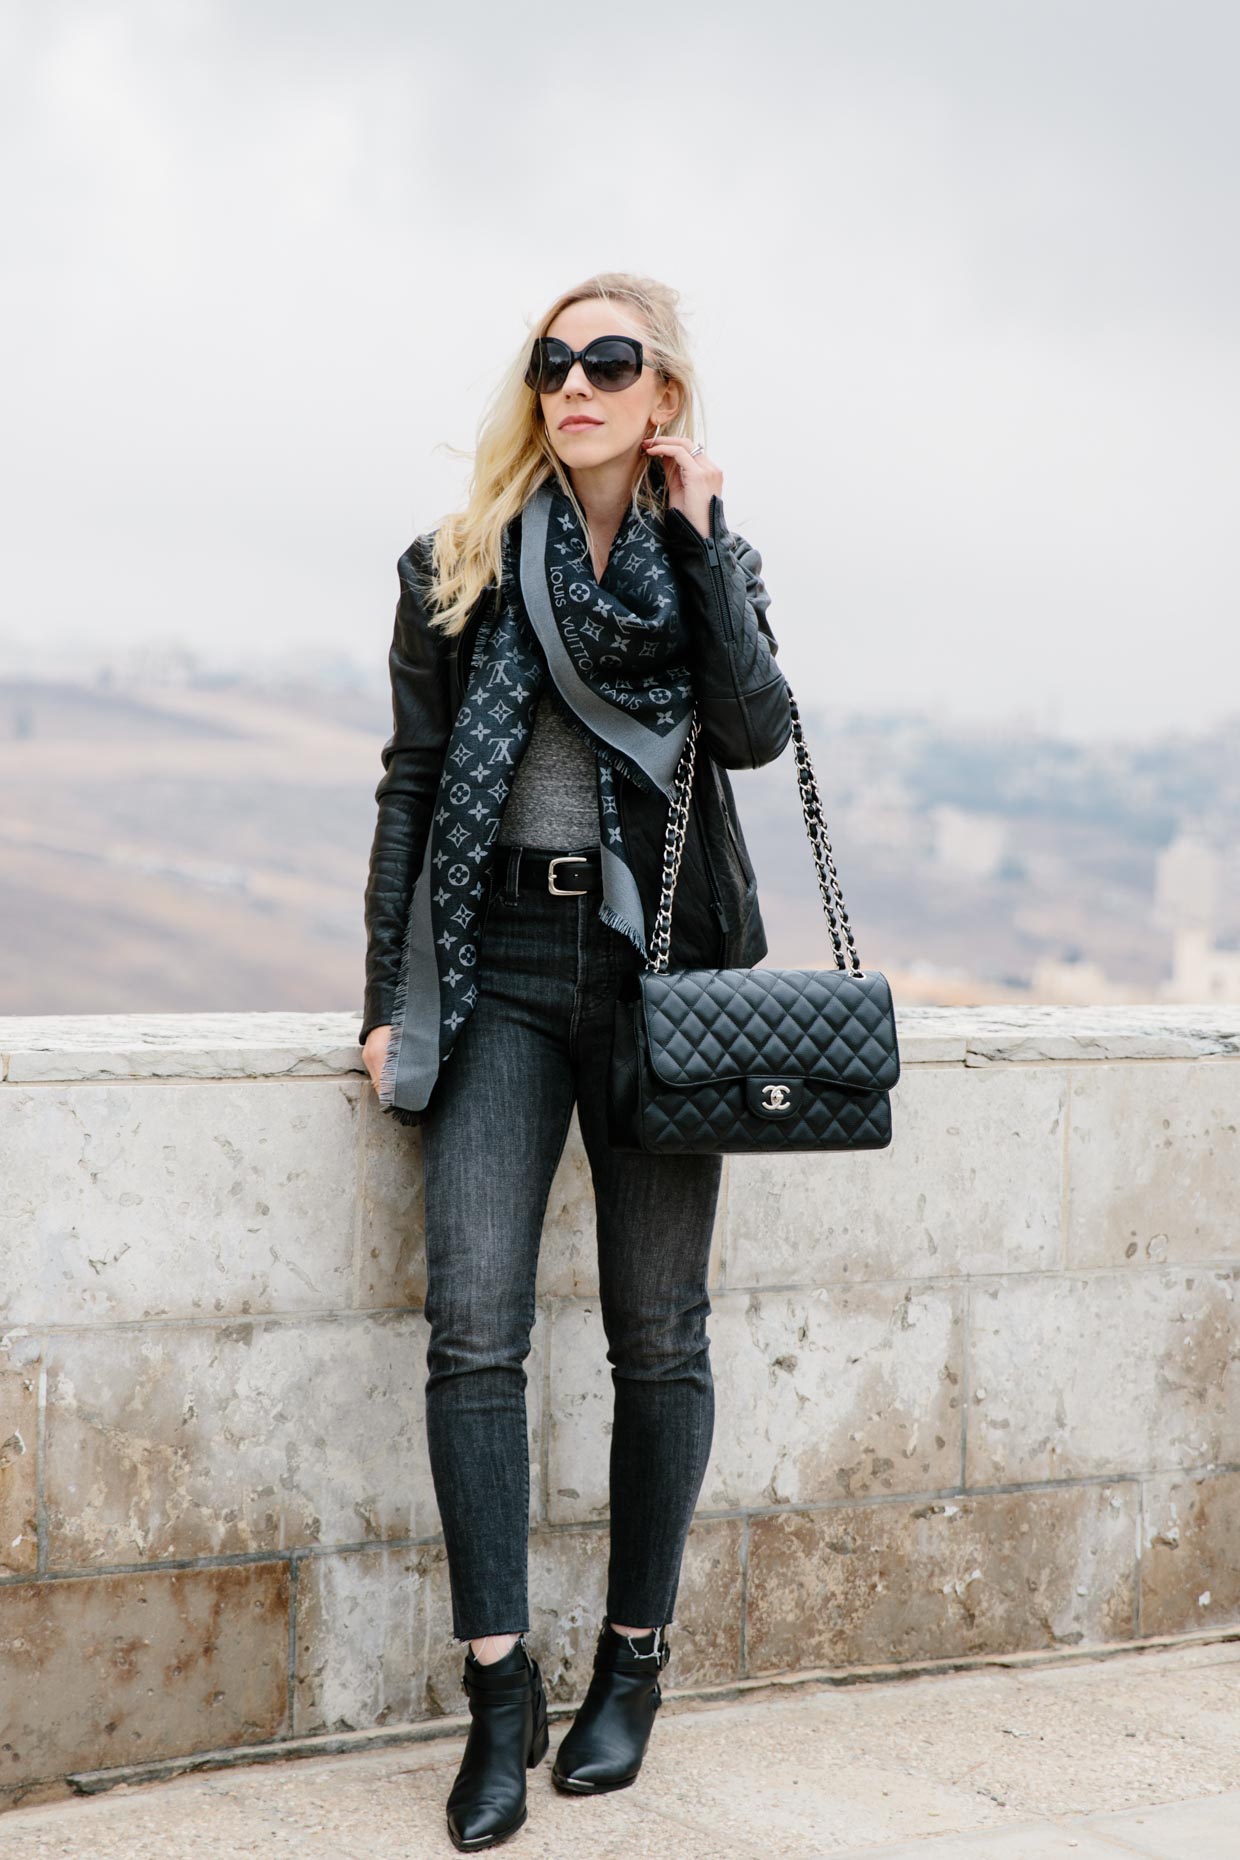 Elegant lady with hat, scarf, boots and Louis Vuitton bag